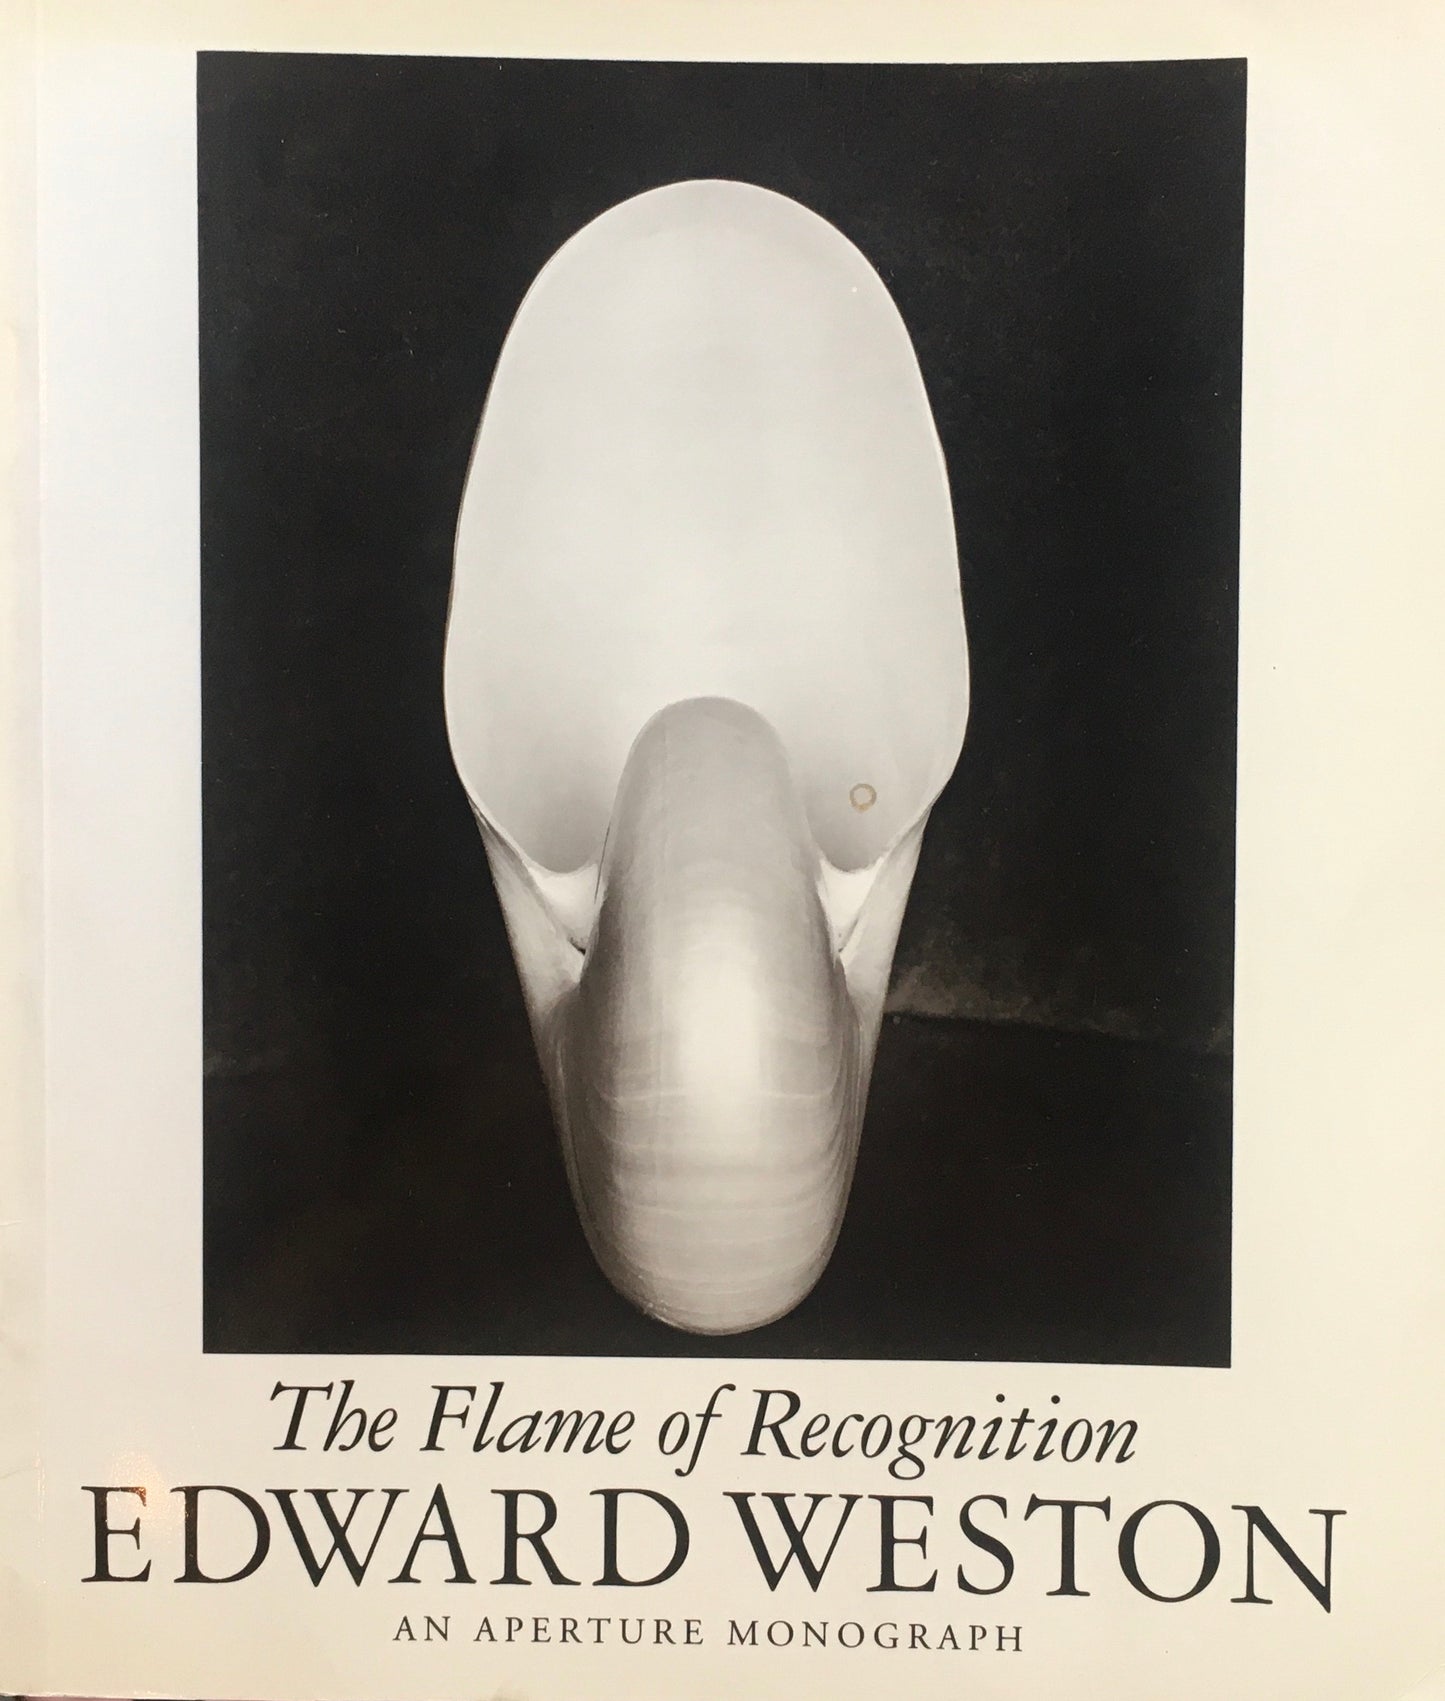 The Flame of Recognition　EDWARD WESTON　エドワード・ウェストン写真集